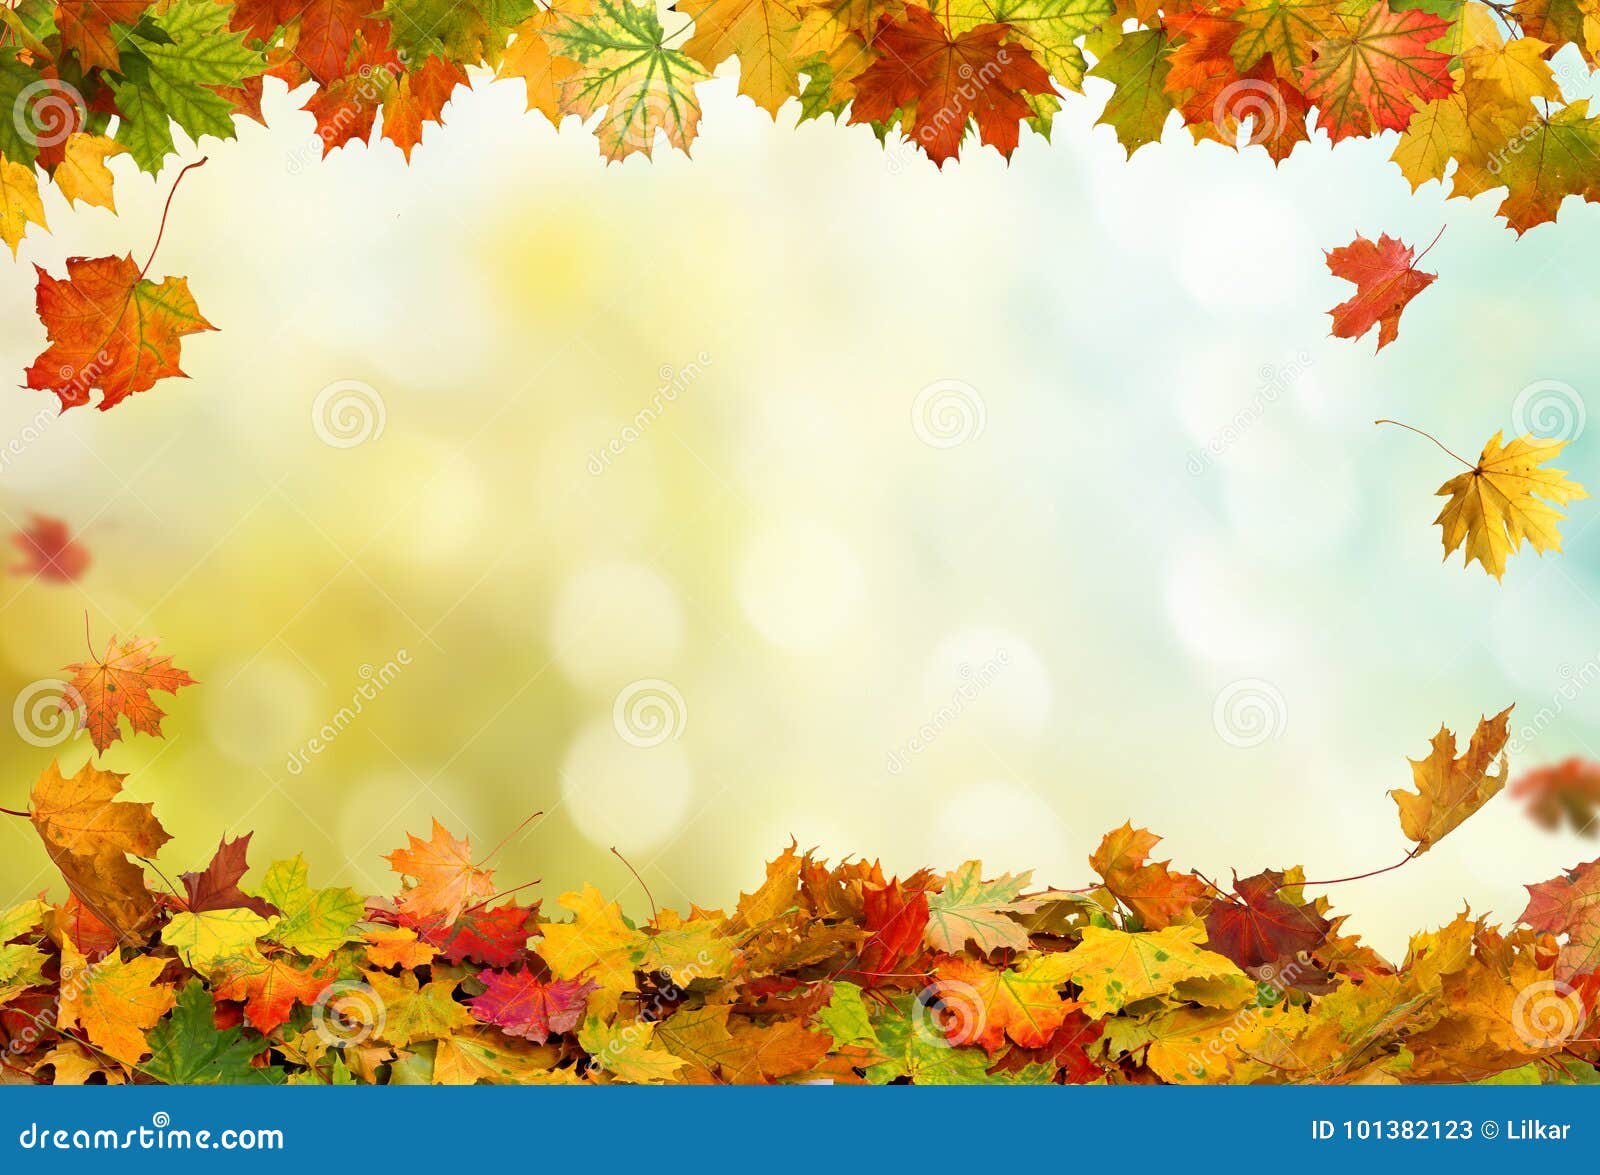 Autumn Falling Maple Leaves Background Stock Image - Image of color,  autumn: 101382123